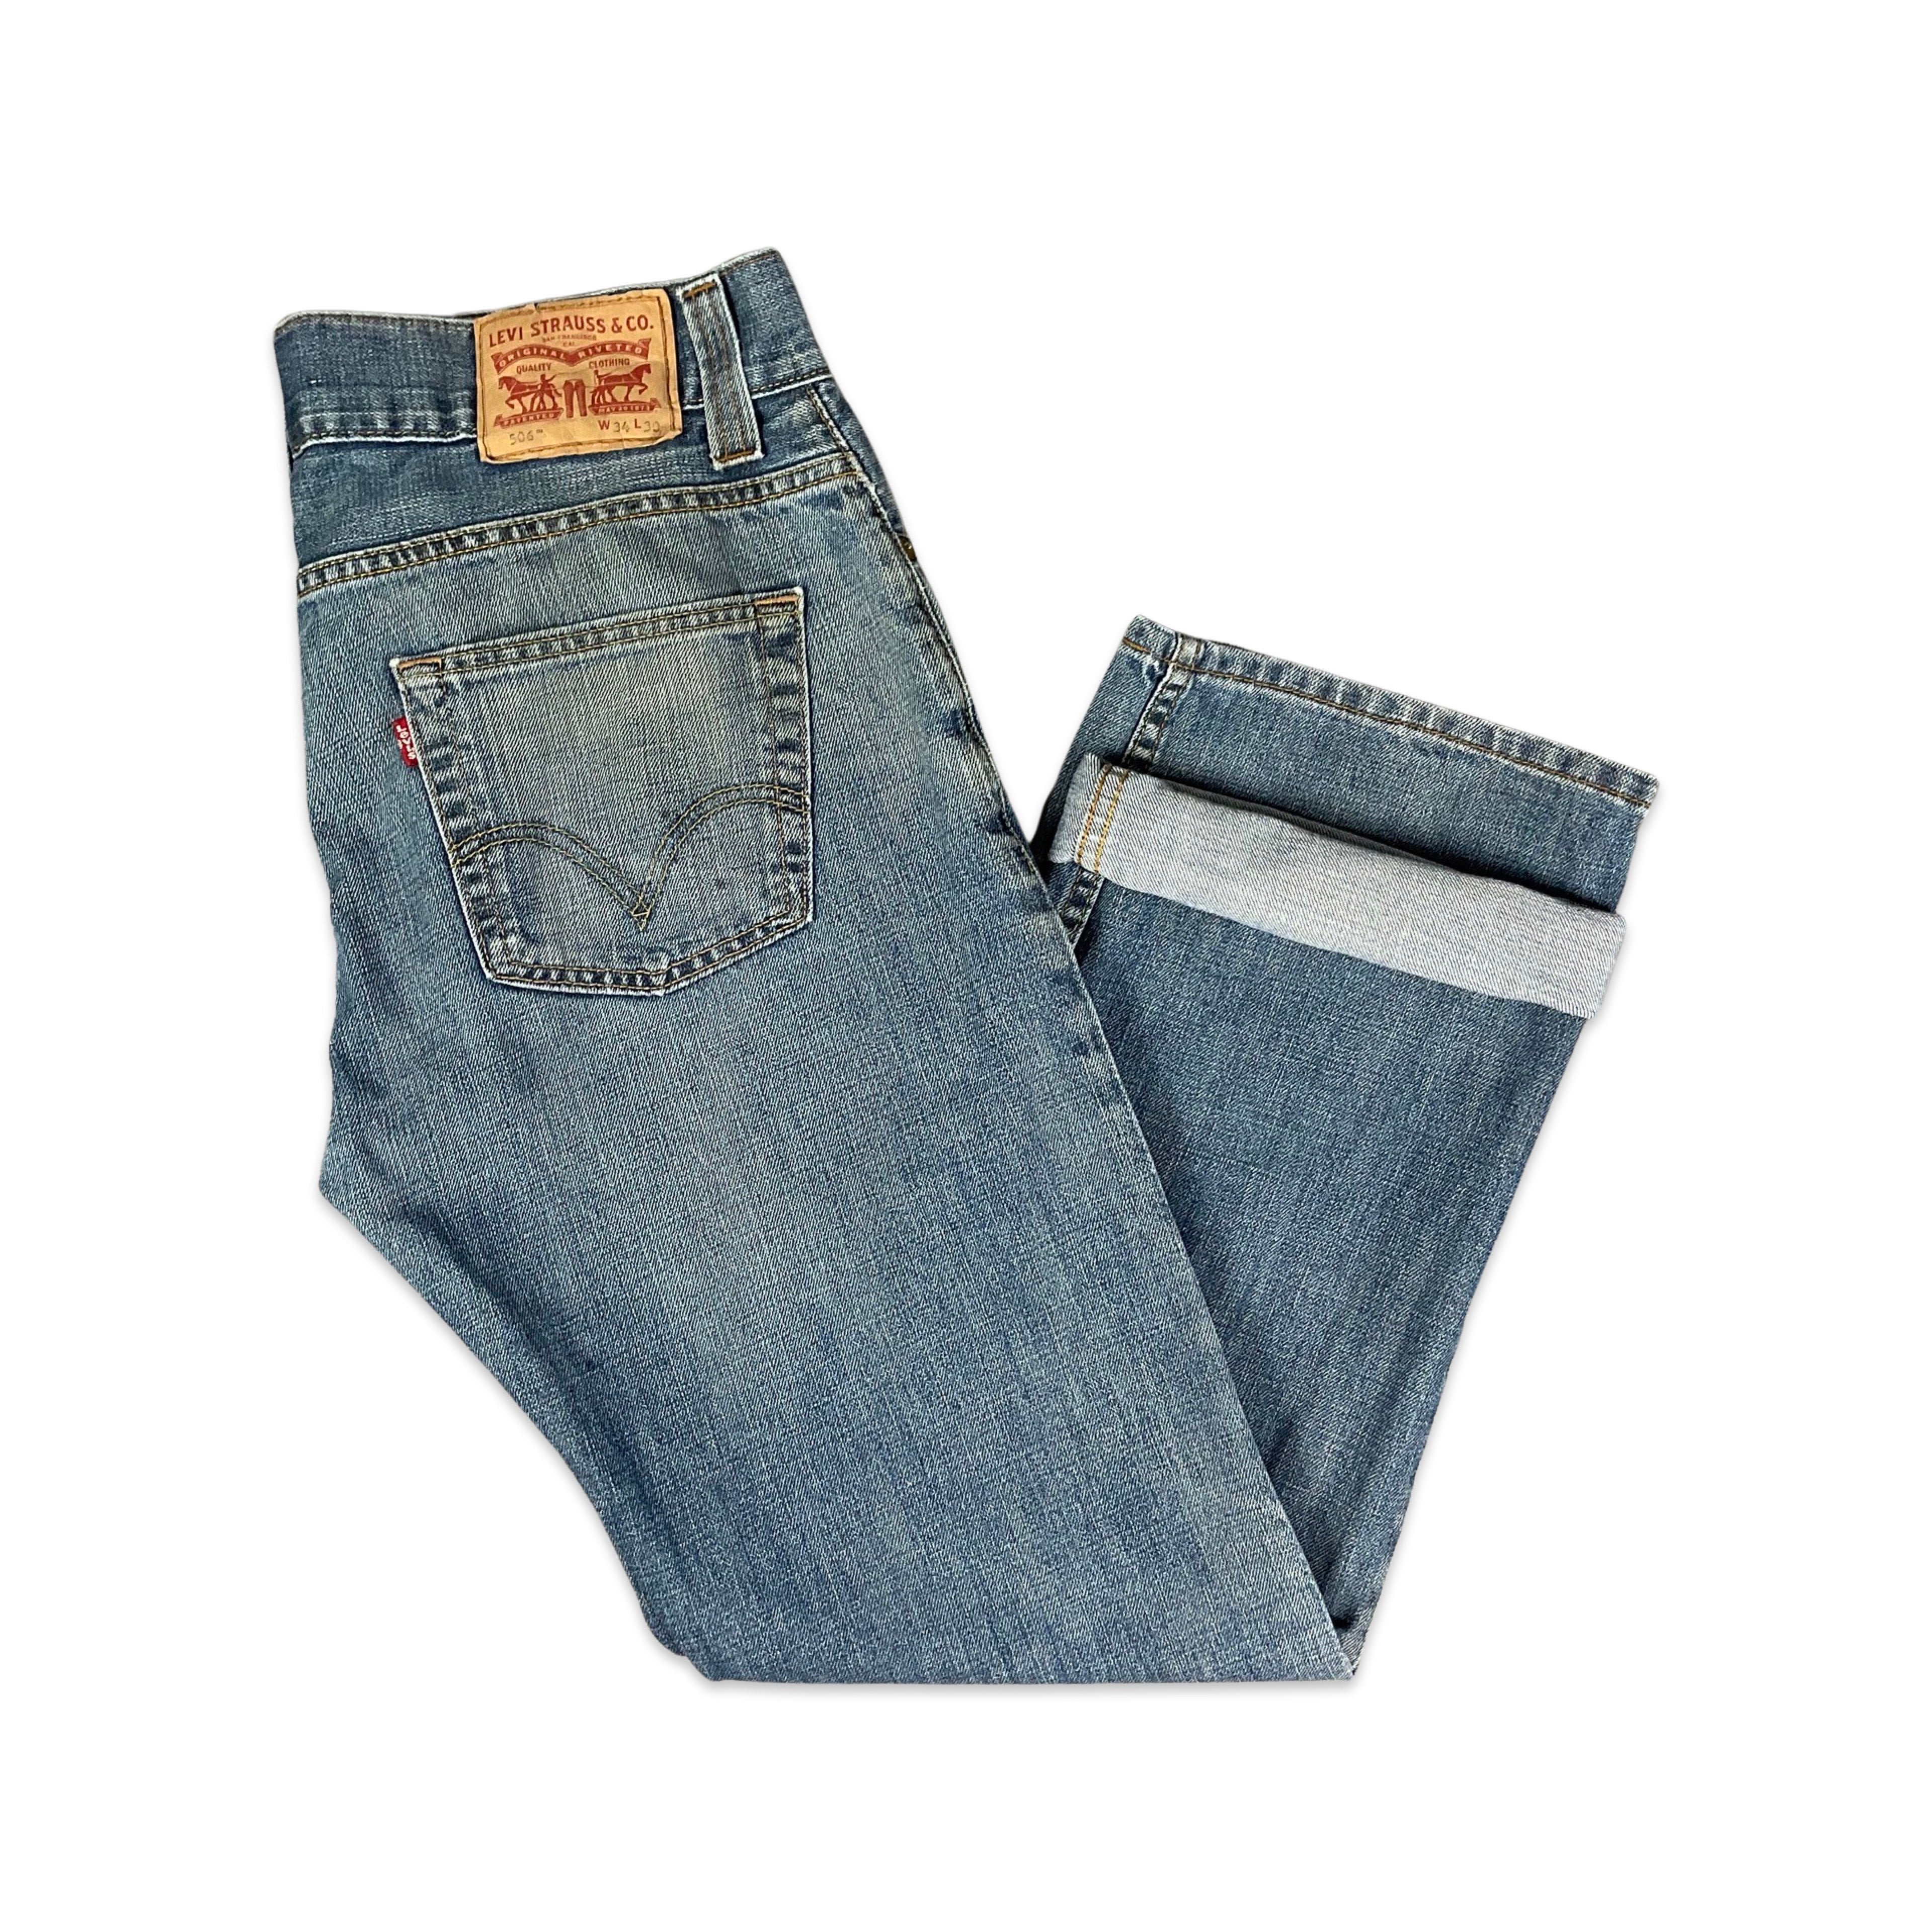 Buy Size 37 Vintage 521 Medium Wash Plus Size Jeans W37 L31 Light-weight  Denim Slim Fit Distressed Tapered Leg Levis Waist 37 Online in India - Etsy